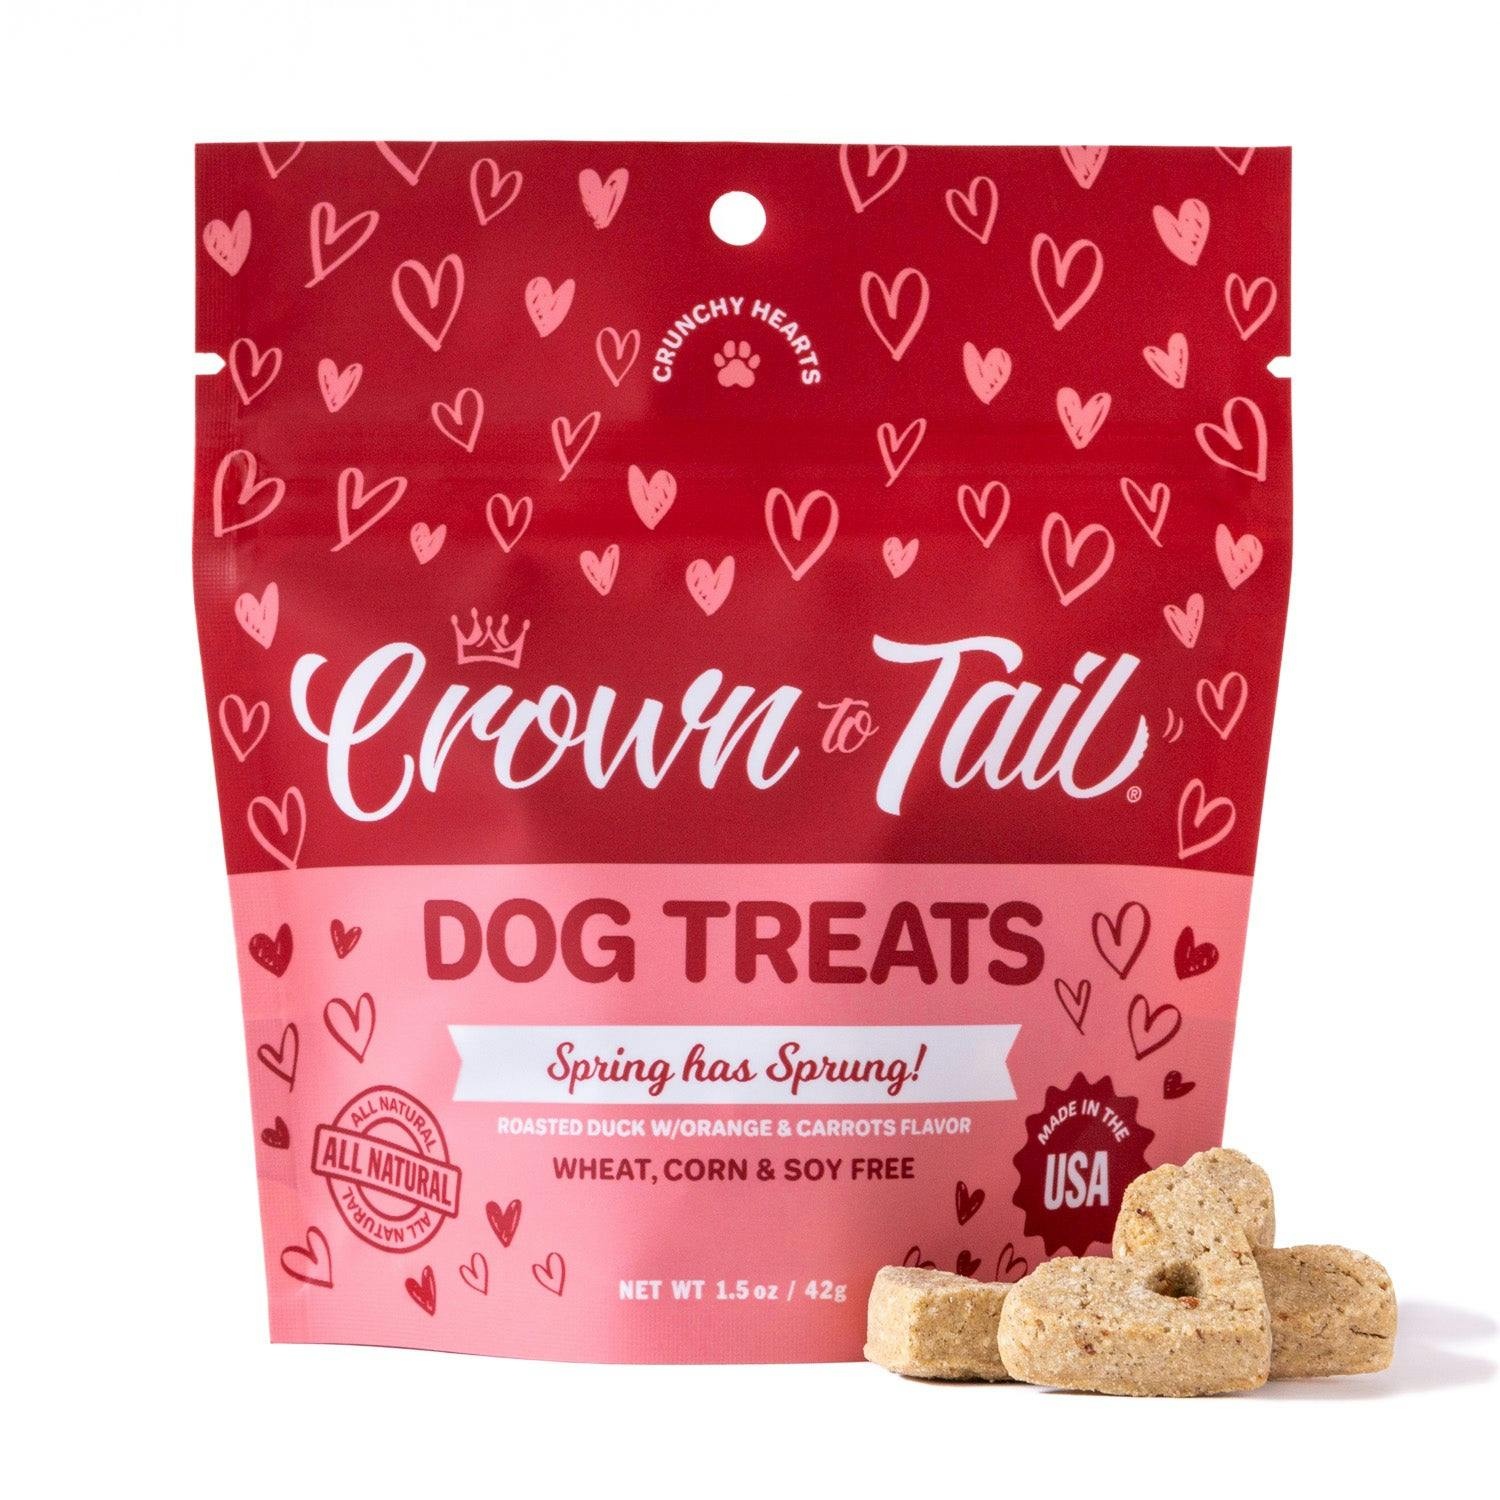 CROWN TO TAIL SPRING HAS SPRUNG CRUNCHY DOG TREATS - Image 0